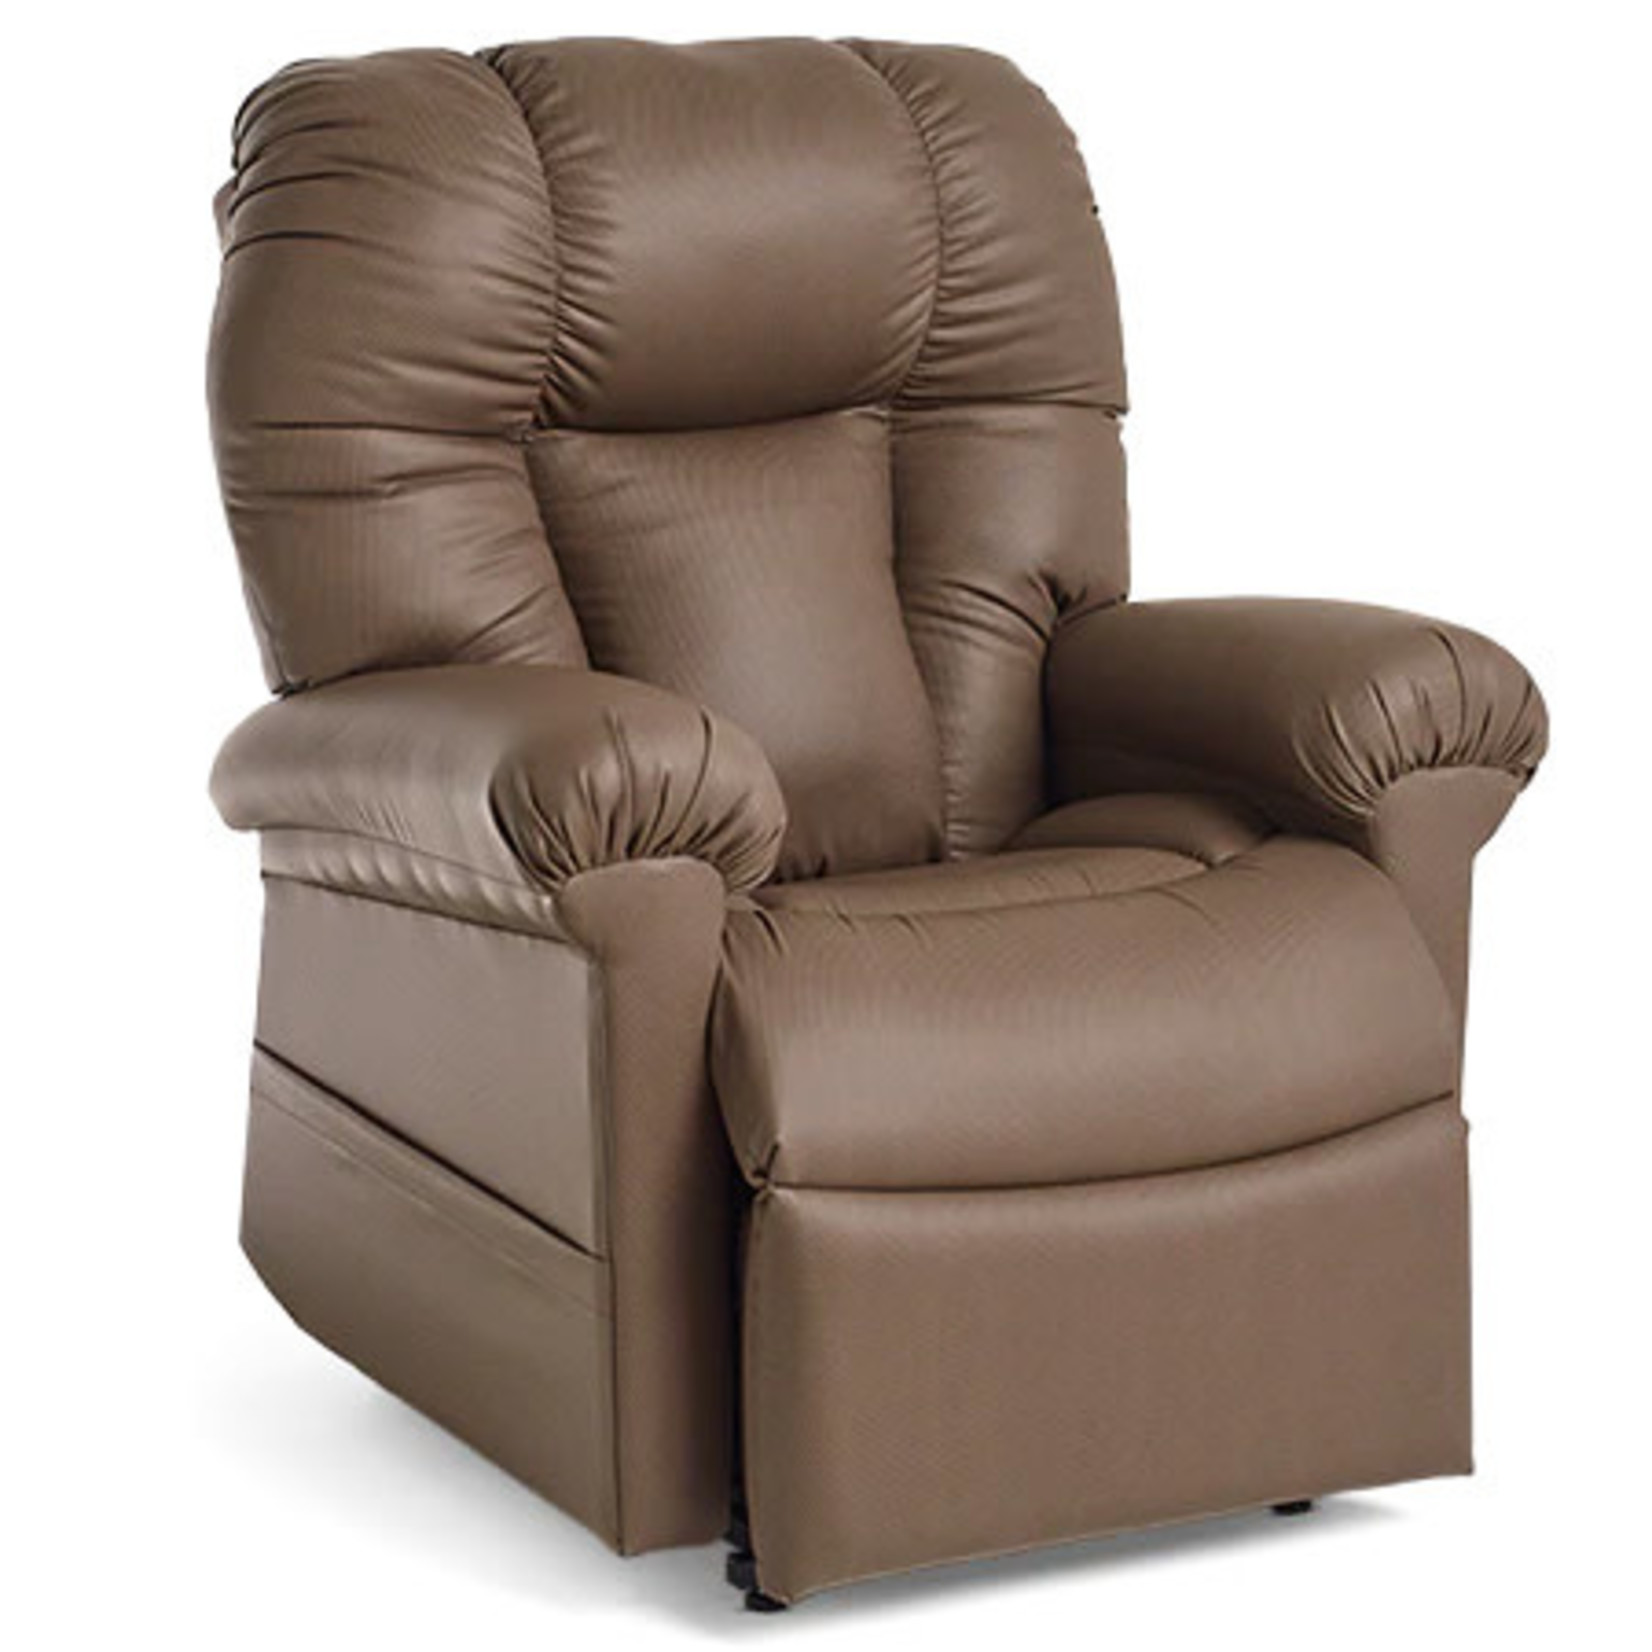 Comfort: Exploring the Benefits of a Sleep Chair Recliners插图4